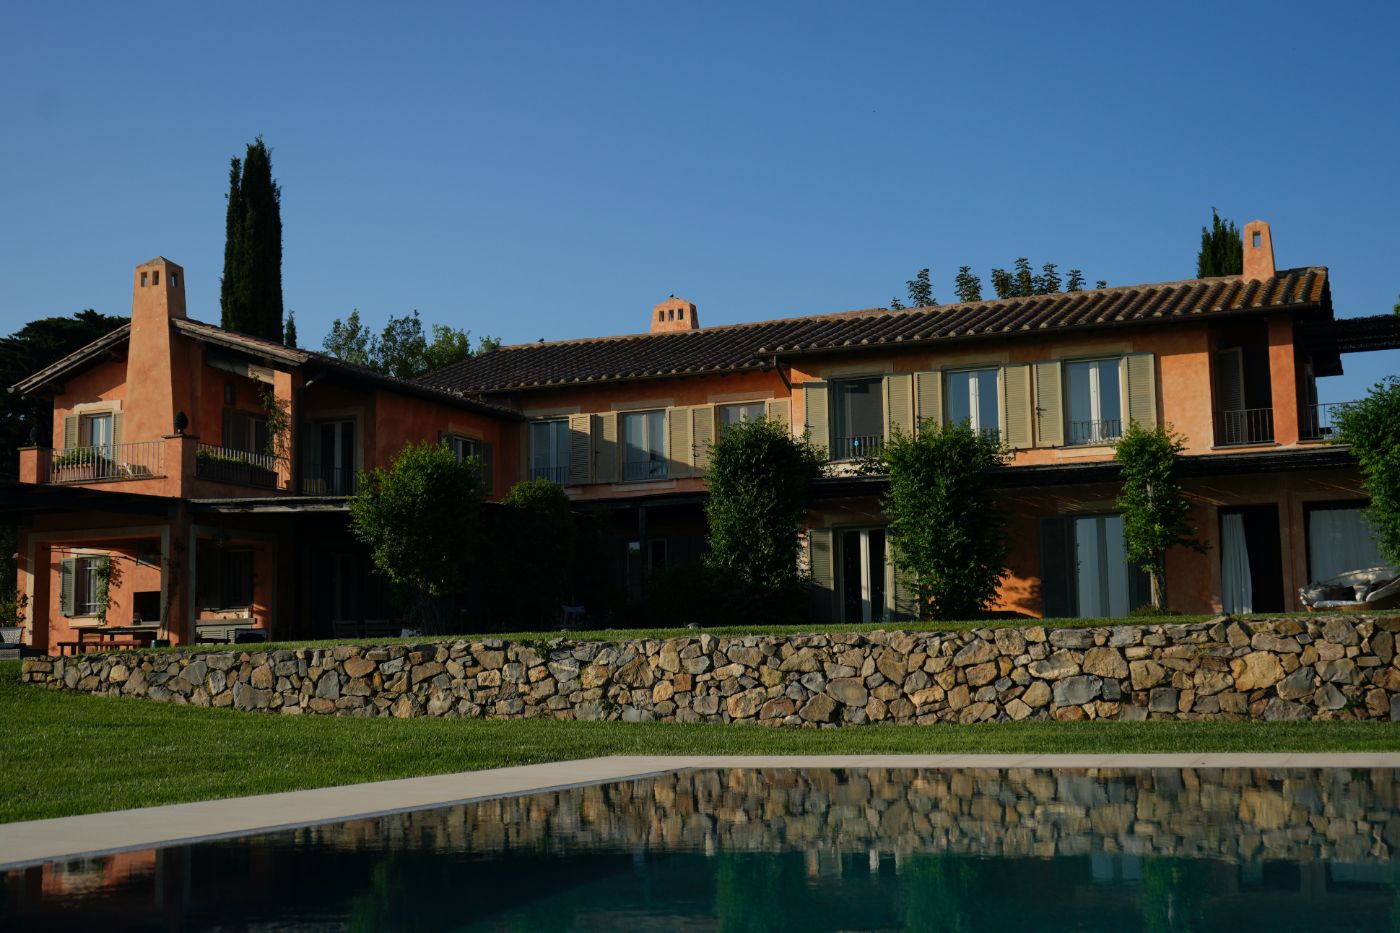 An exterior view of the front of Villa del Gelso.